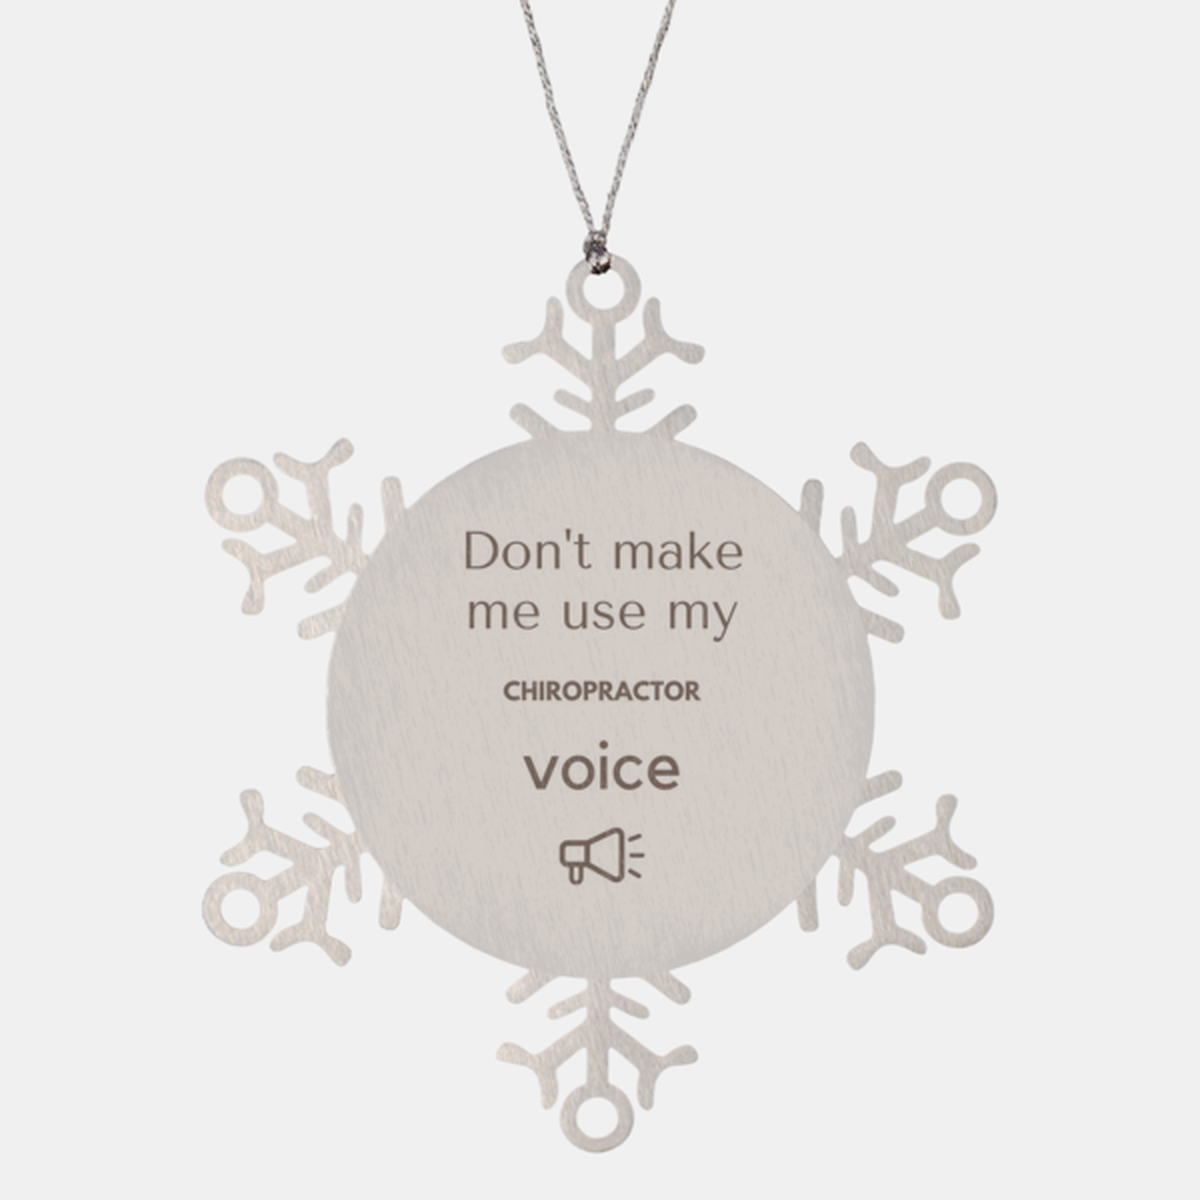 Don't make me use my Chiropractor voice, Sarcasm Chiropractor Ornament Gifts, Christmas Chiropractor Snowflake Ornament Unique Gifts For Chiropractor Coworkers, Men, Women, Colleague, Friends